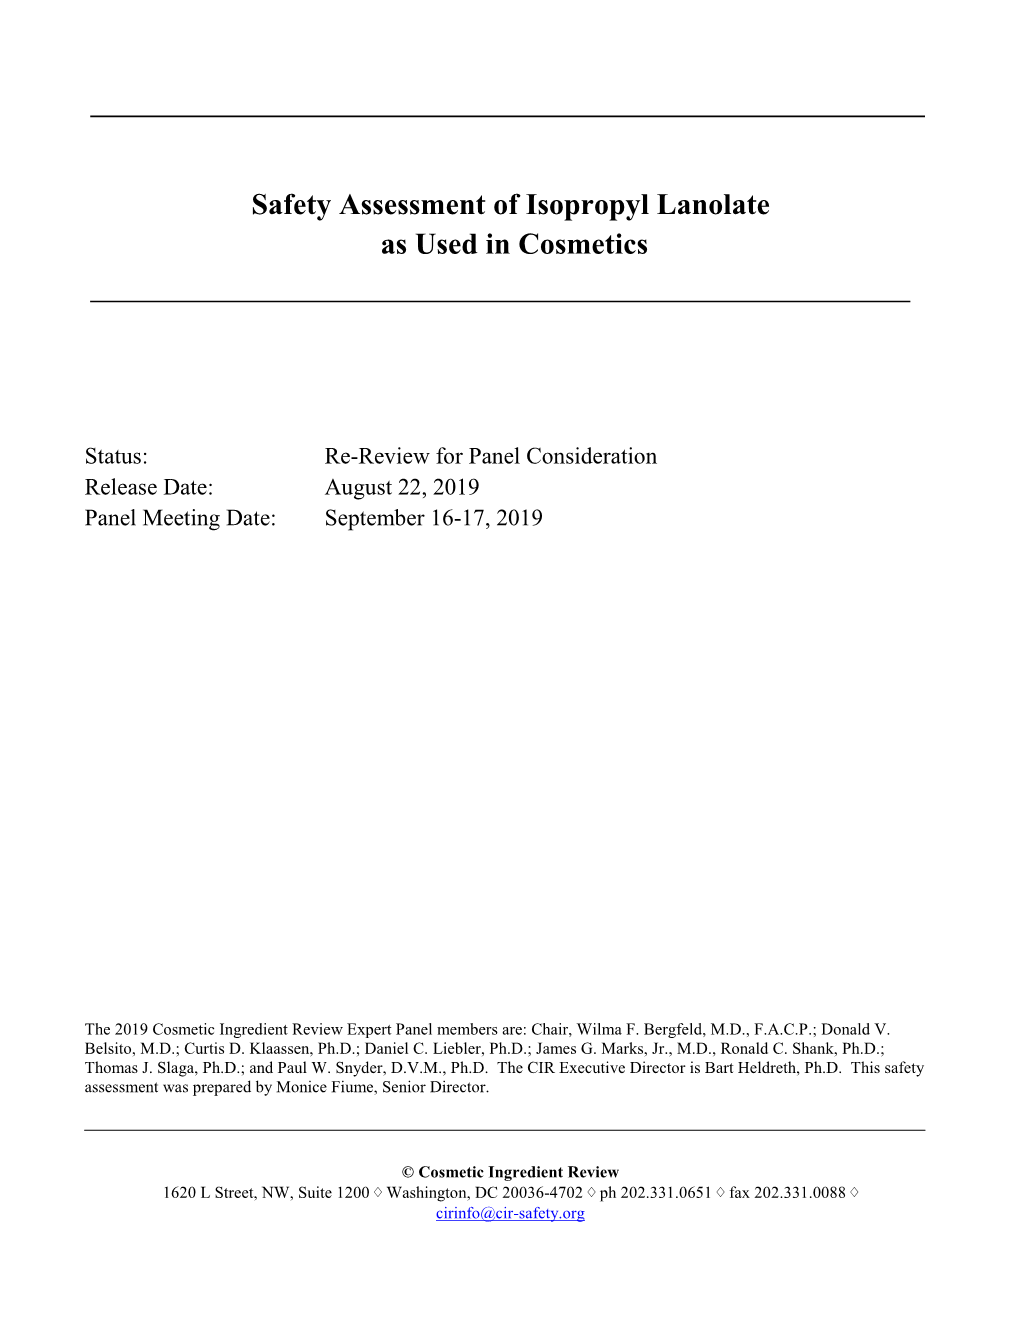 Safety Assessment of Isopropyl Lanolate As Used in Cosmetics